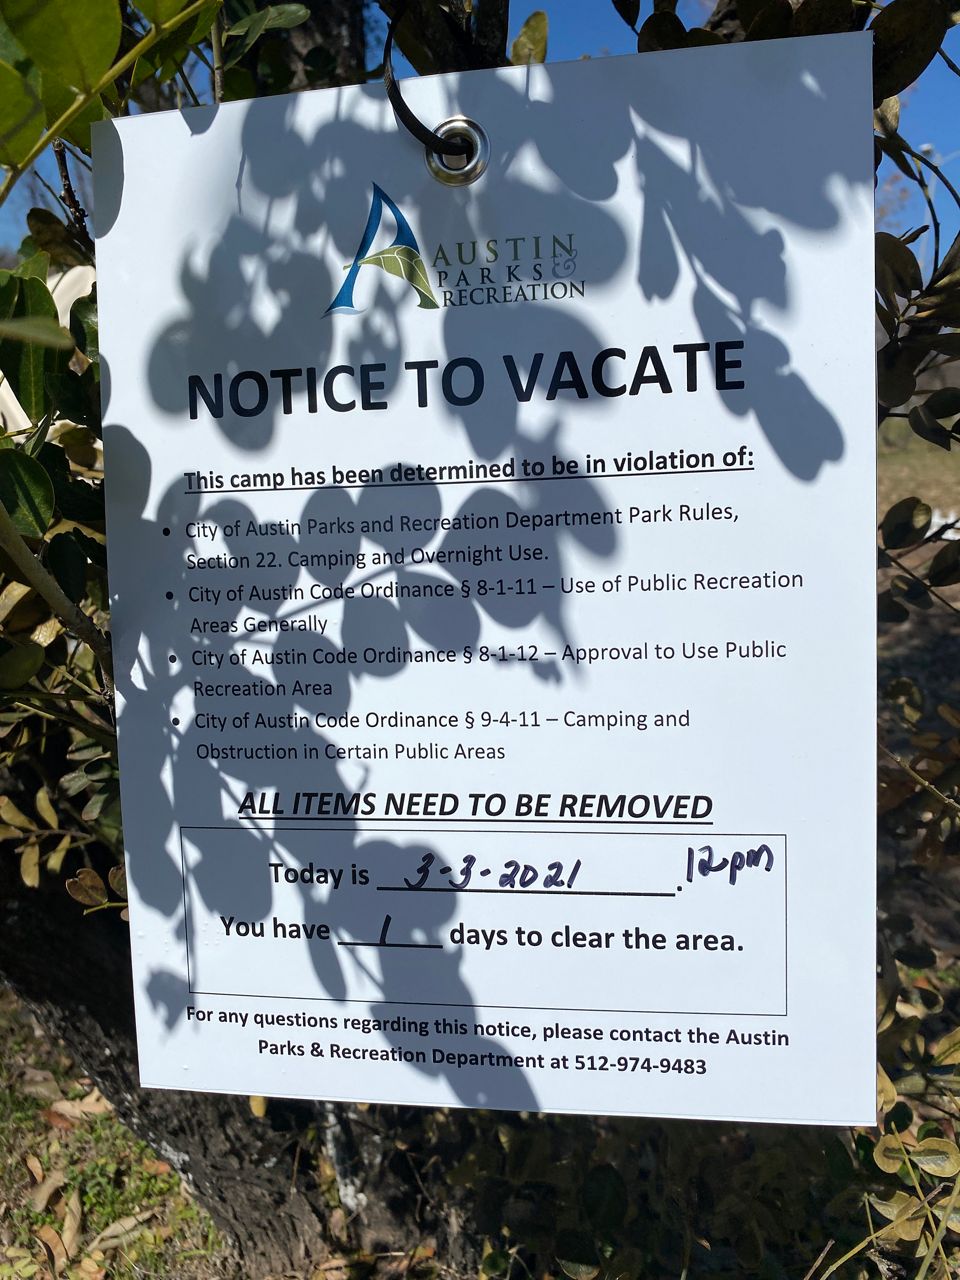 A notice posted by the City of Austin at Rosewood Park instructs 400+1 to vacate the area. (Spectrum News 1/Niki Griswold)